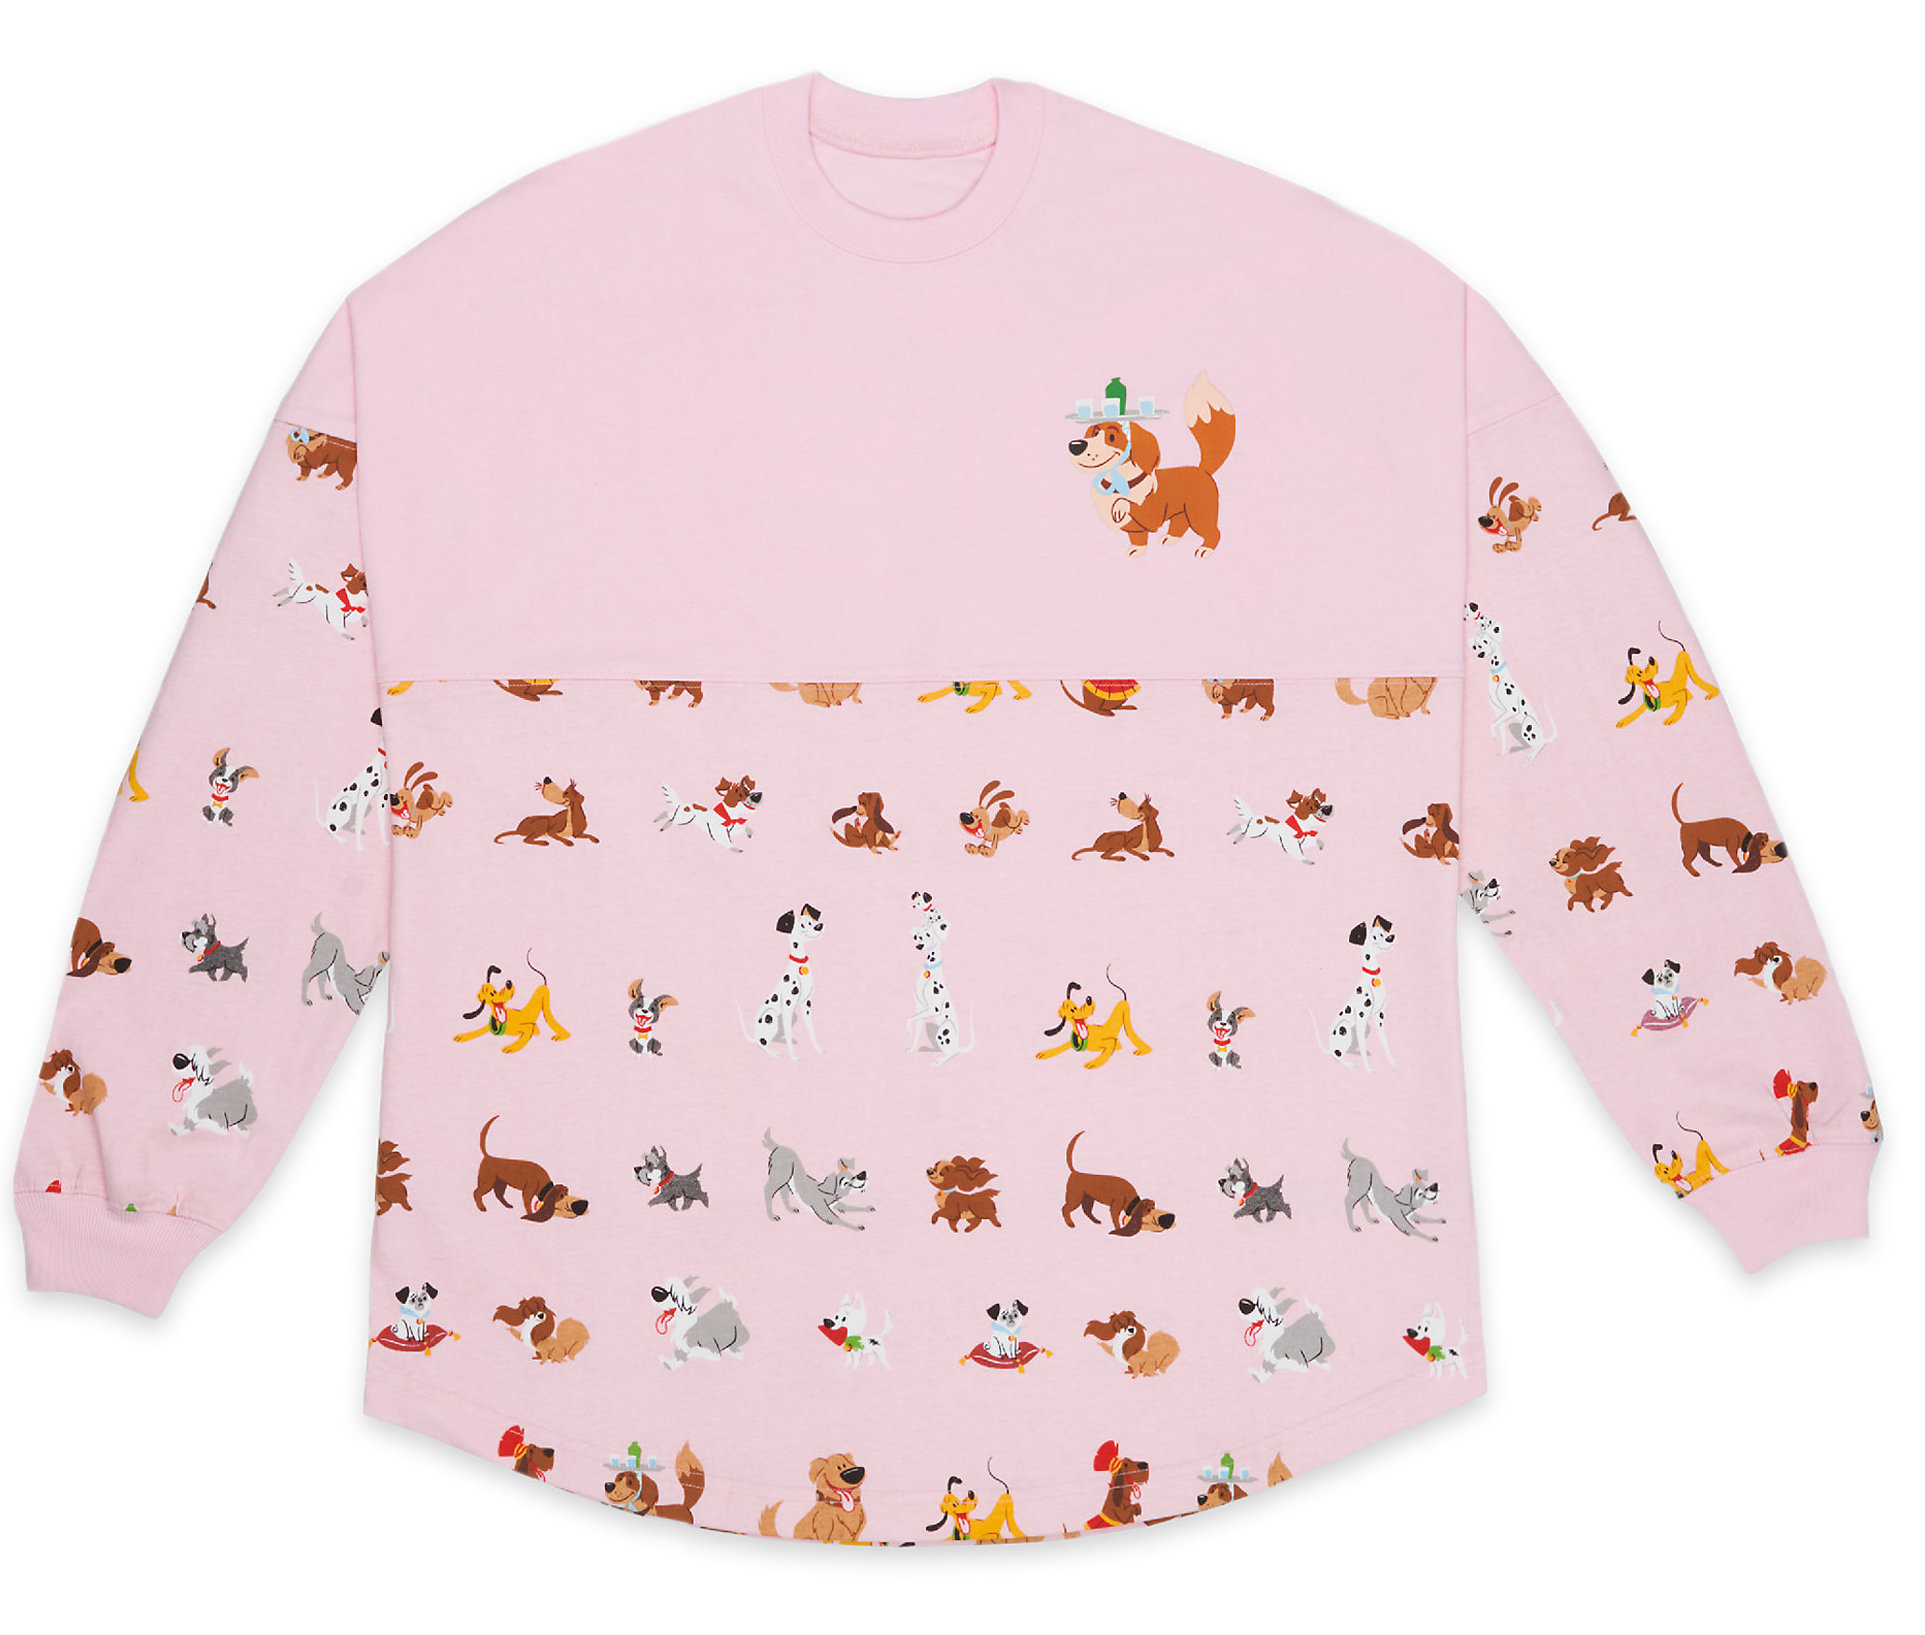 gracht B.C. Buitenlander Disney Parks Reigning Cats and Dogs collection disney dogs spirit jersey  pink - AllEars.Net